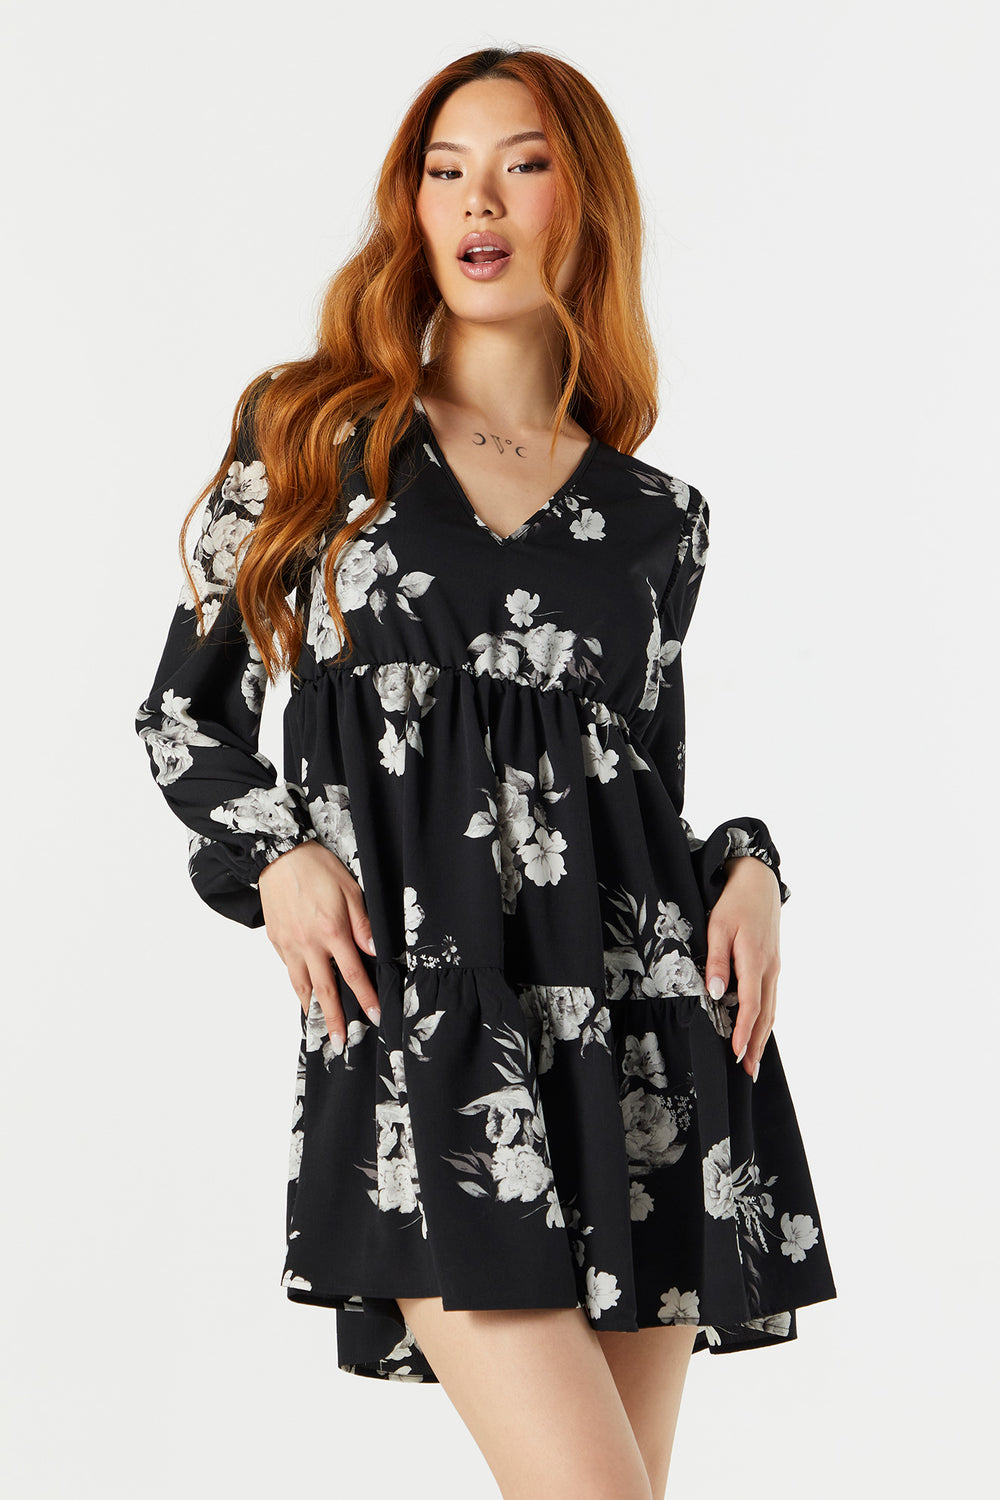 Black Floral Long Sleeve Tiered Babydoll Dress Black Floral Long Sleeve Tiered Babydoll Dress 1